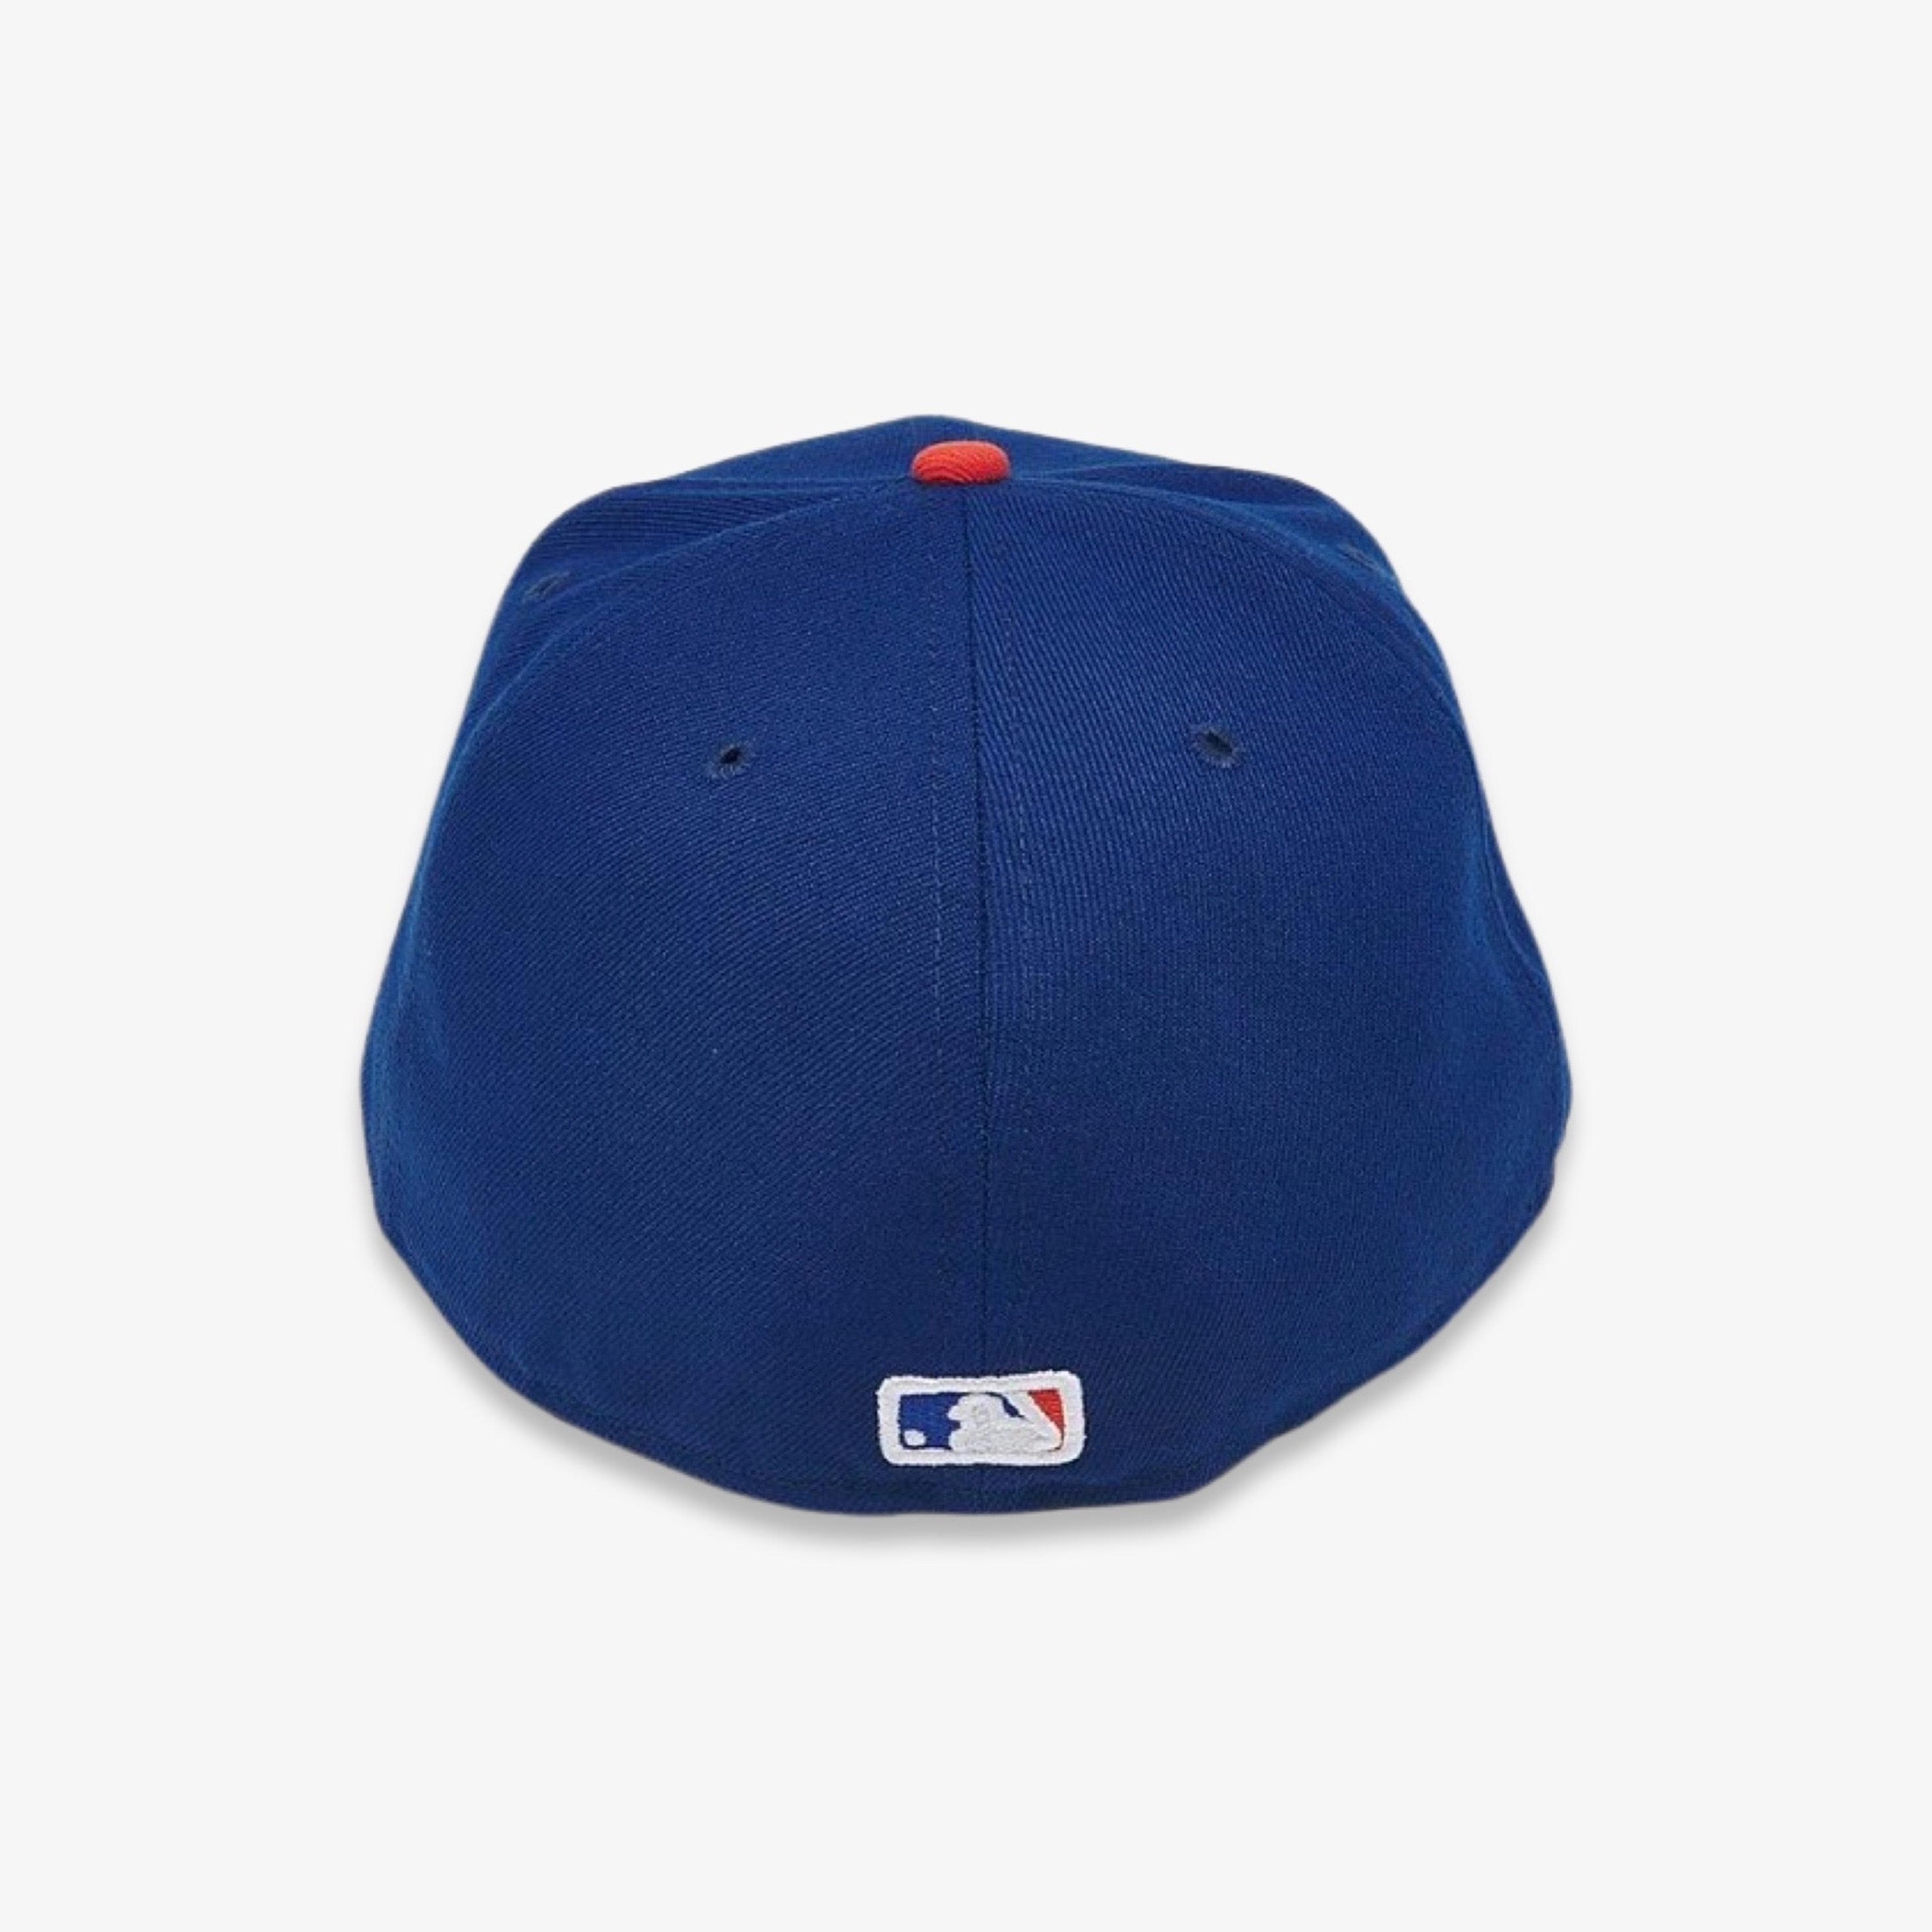 Alternate View 2 of New Era x MLB 'New York Mets' 59Fifty Patch Fitted Hat SS17